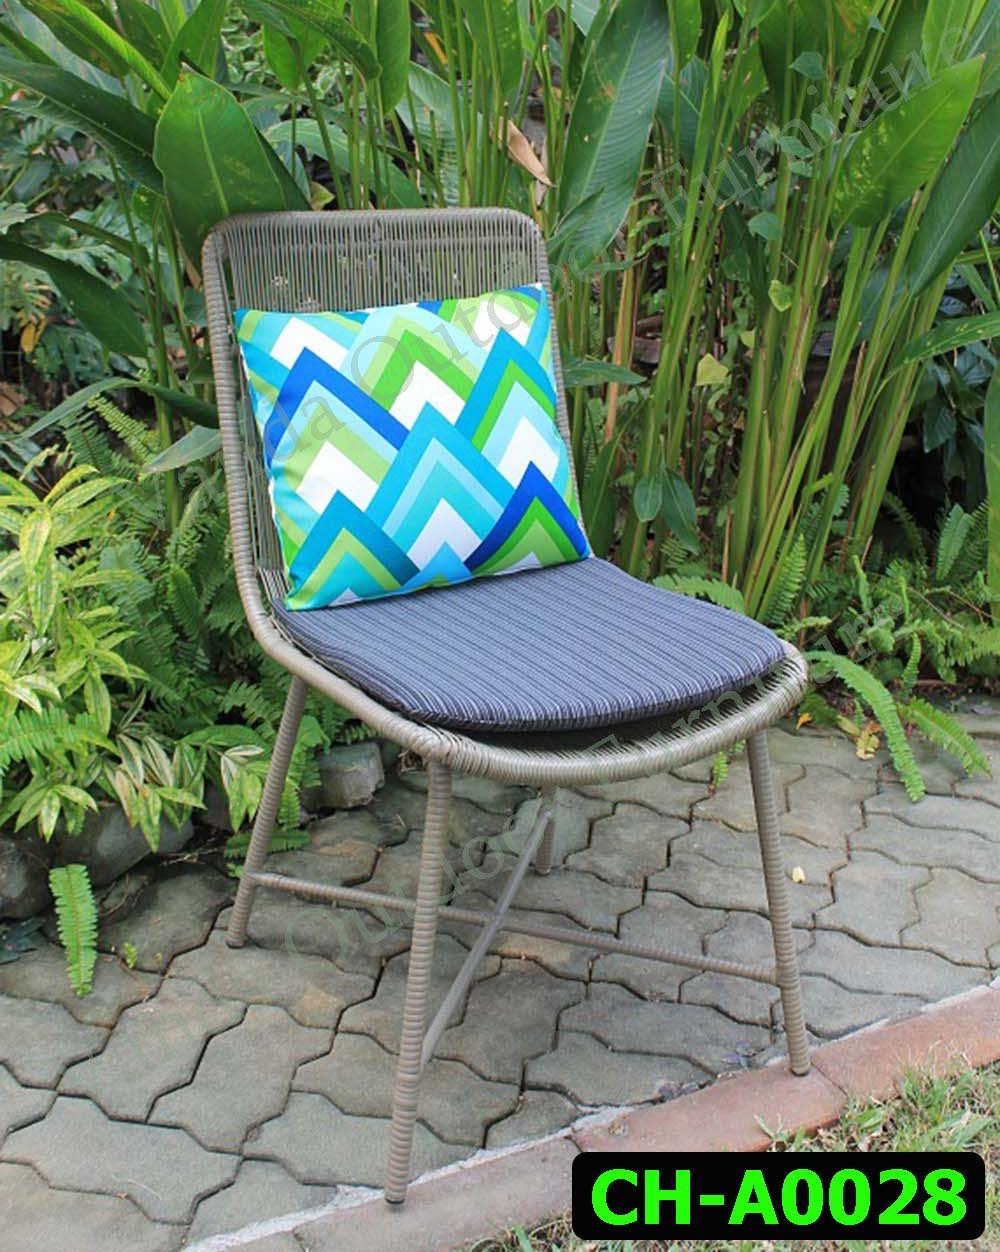 Rattan Chair Product code CH-A0028